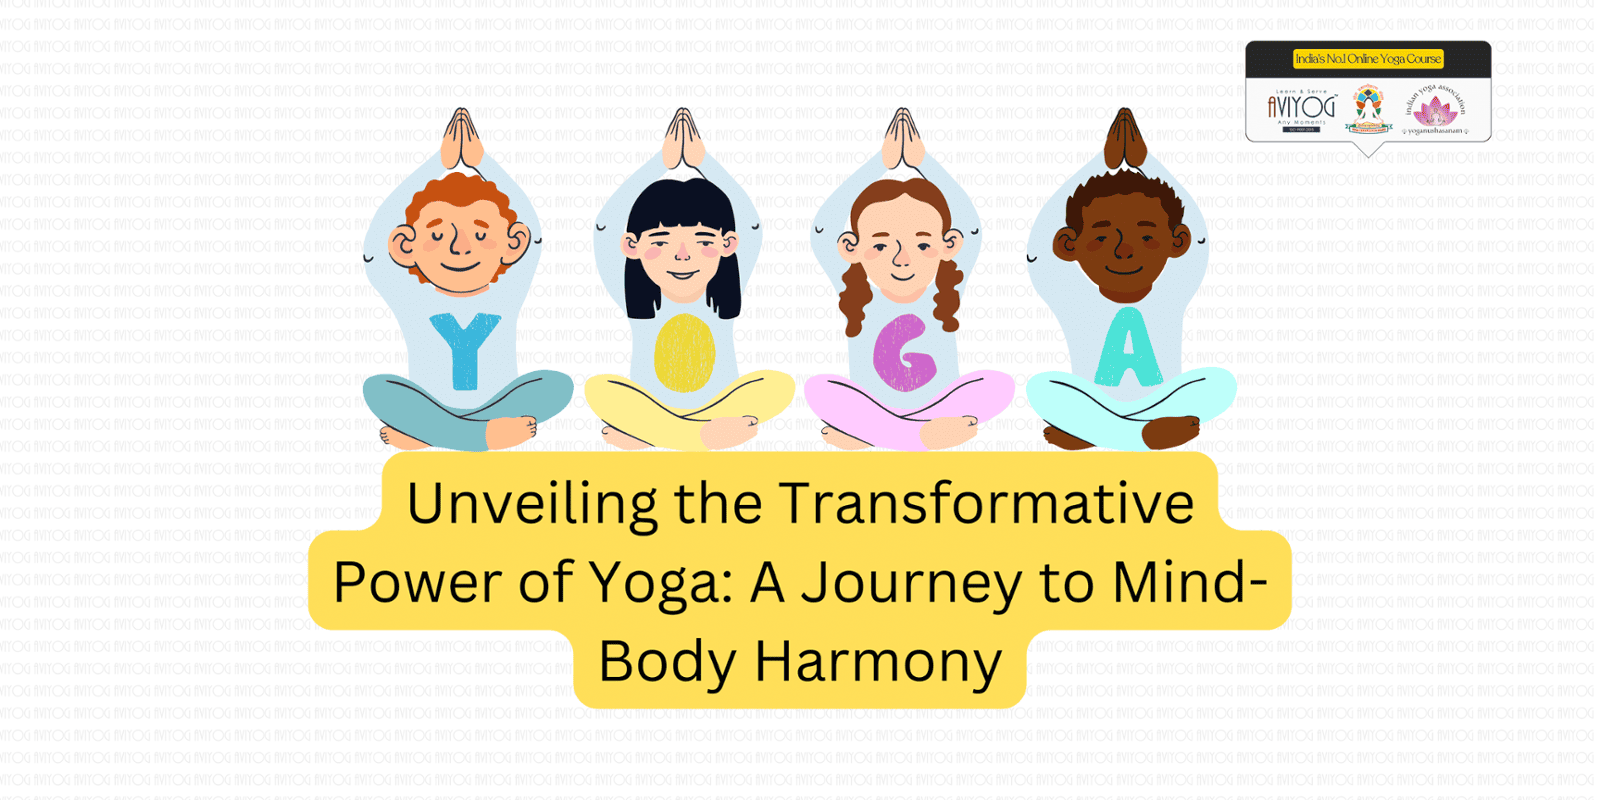 Unveiling the Transformative Power of Yoga: A Journey to Mind-Body Harmony